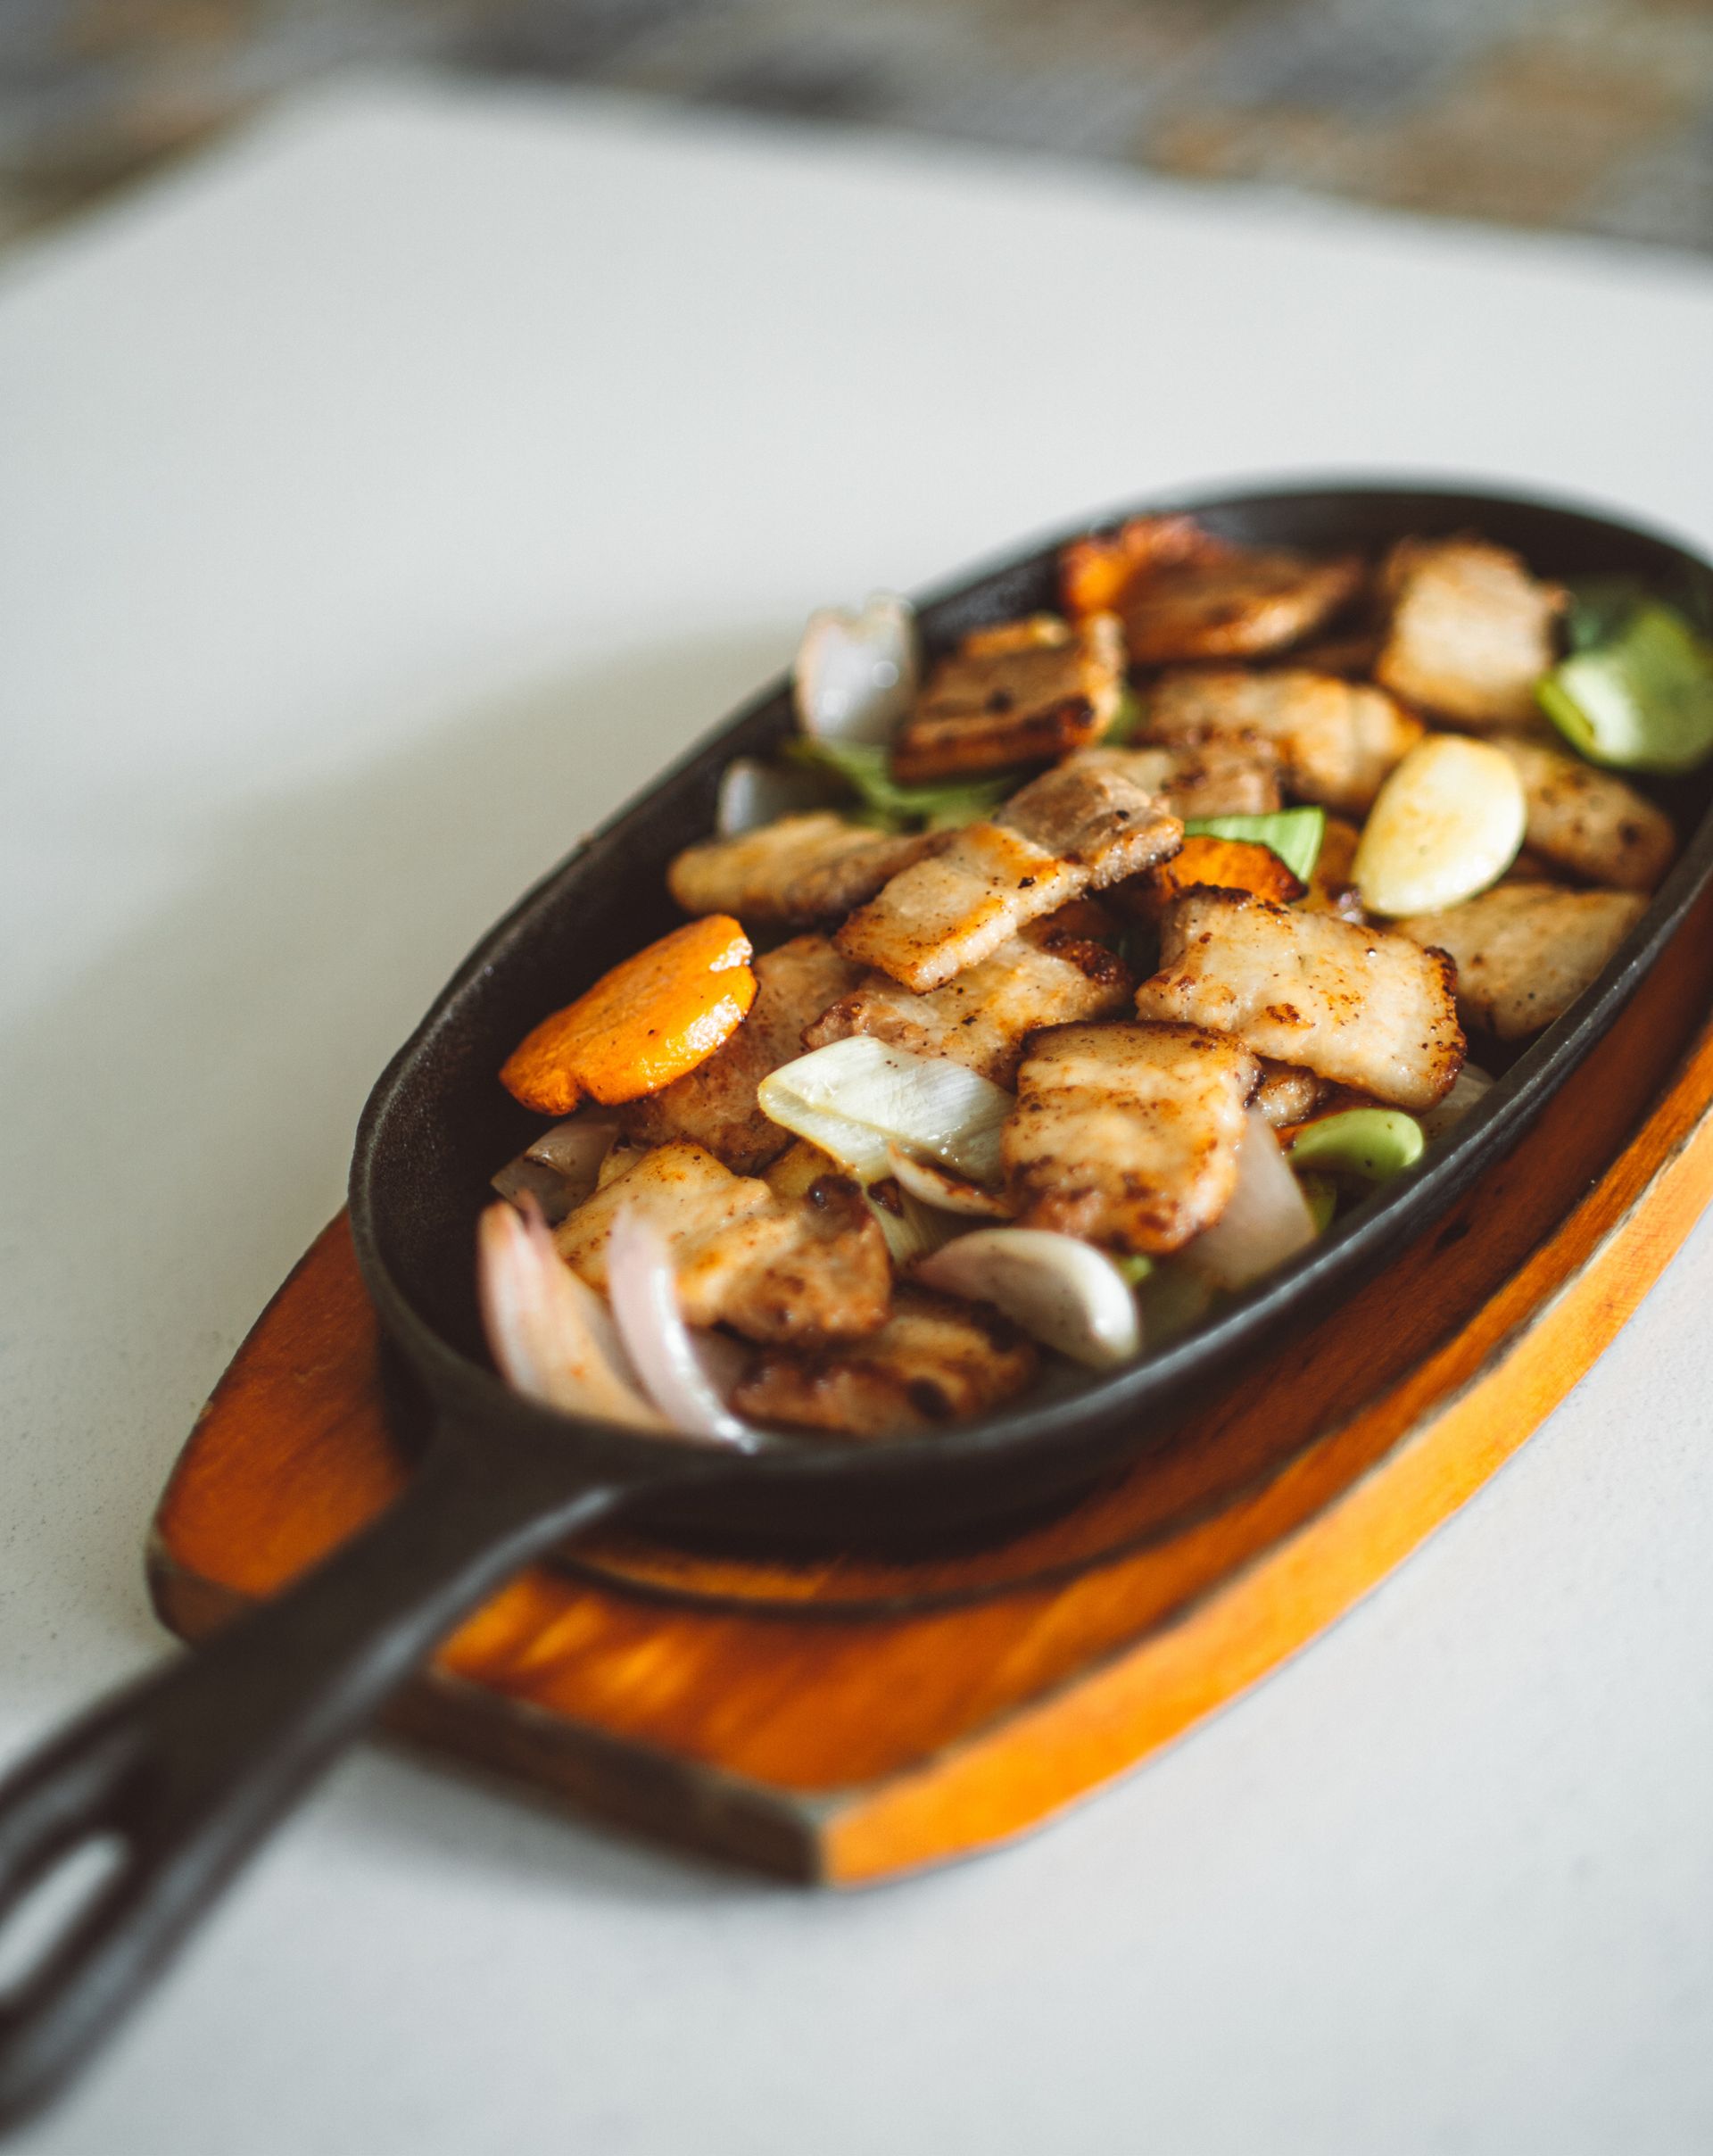 Photo of a meal served on a cast iron pan